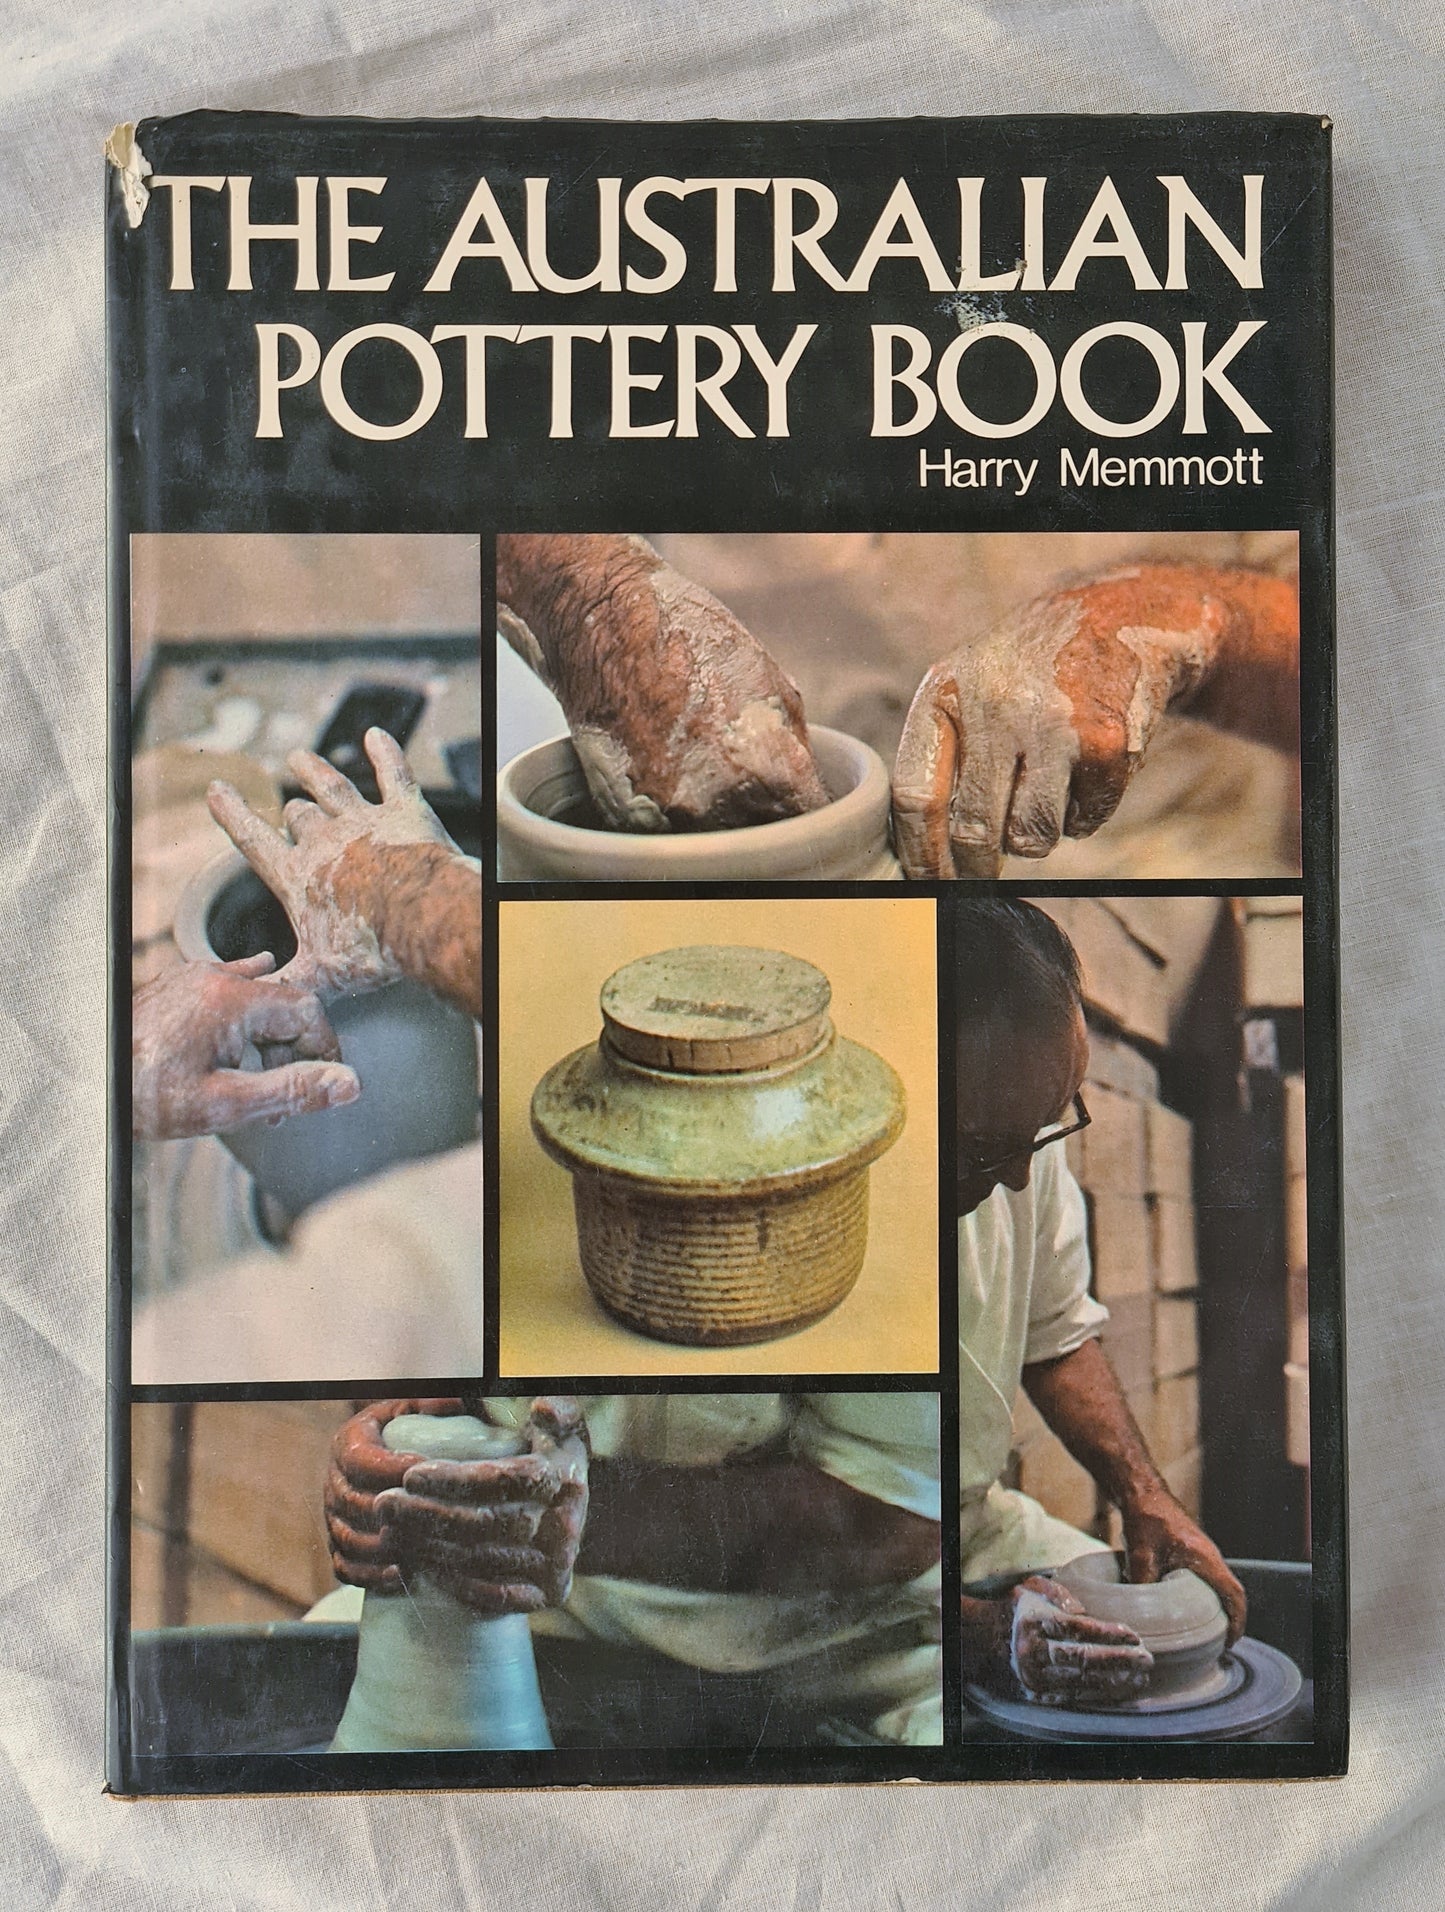 The Australian Pottery Book  A Comprehensive Guide to Pottery  by Harry Memmott